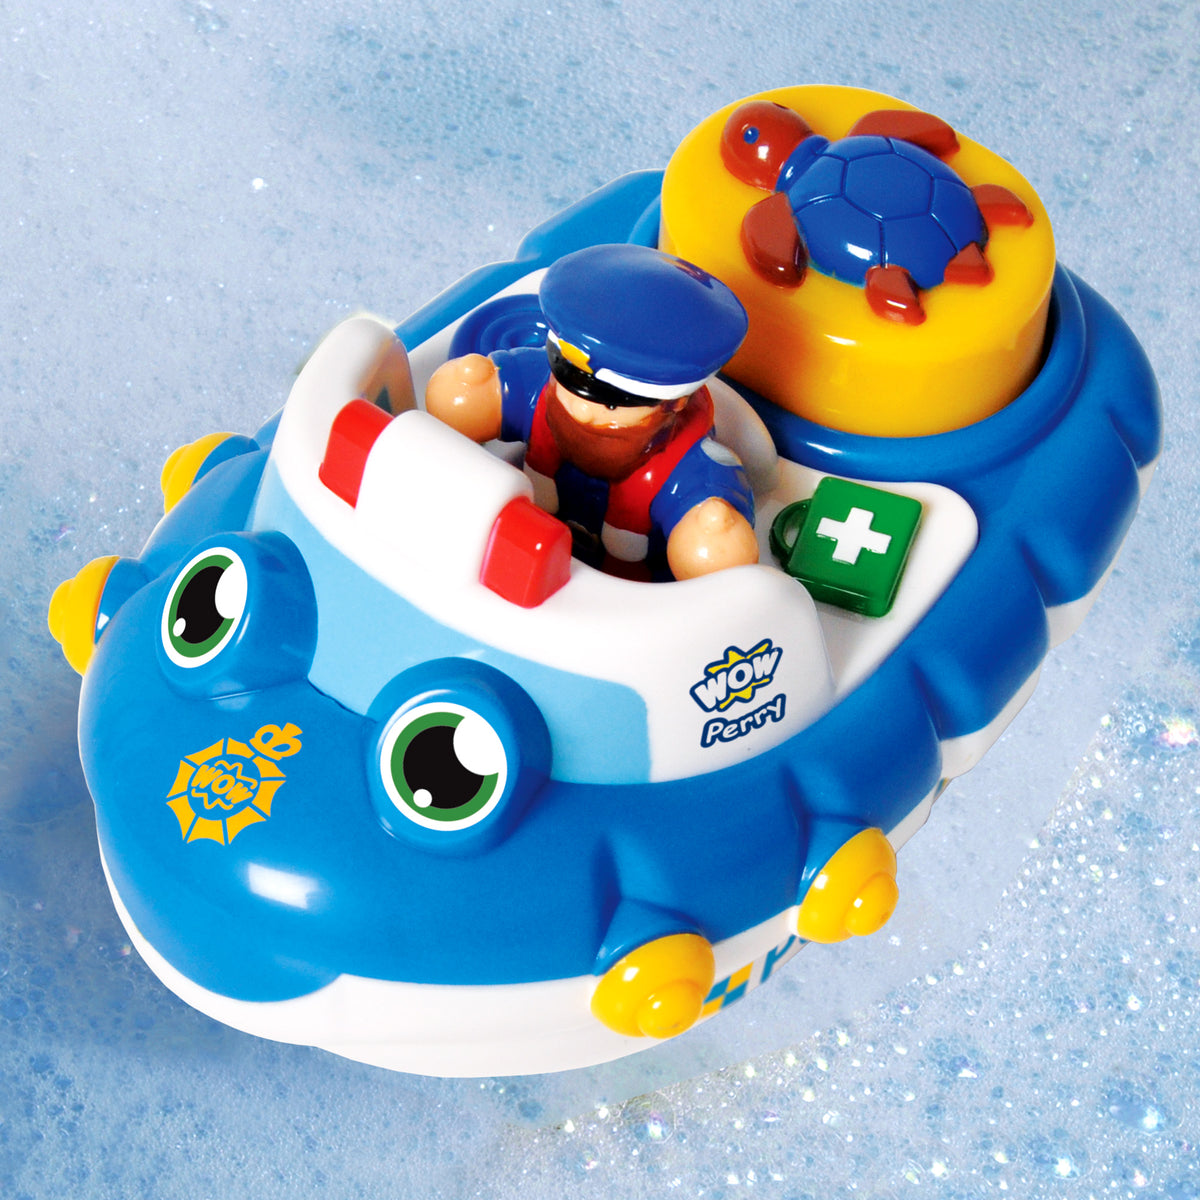 WOW Toys Police Boat Perry (Bath Toy)